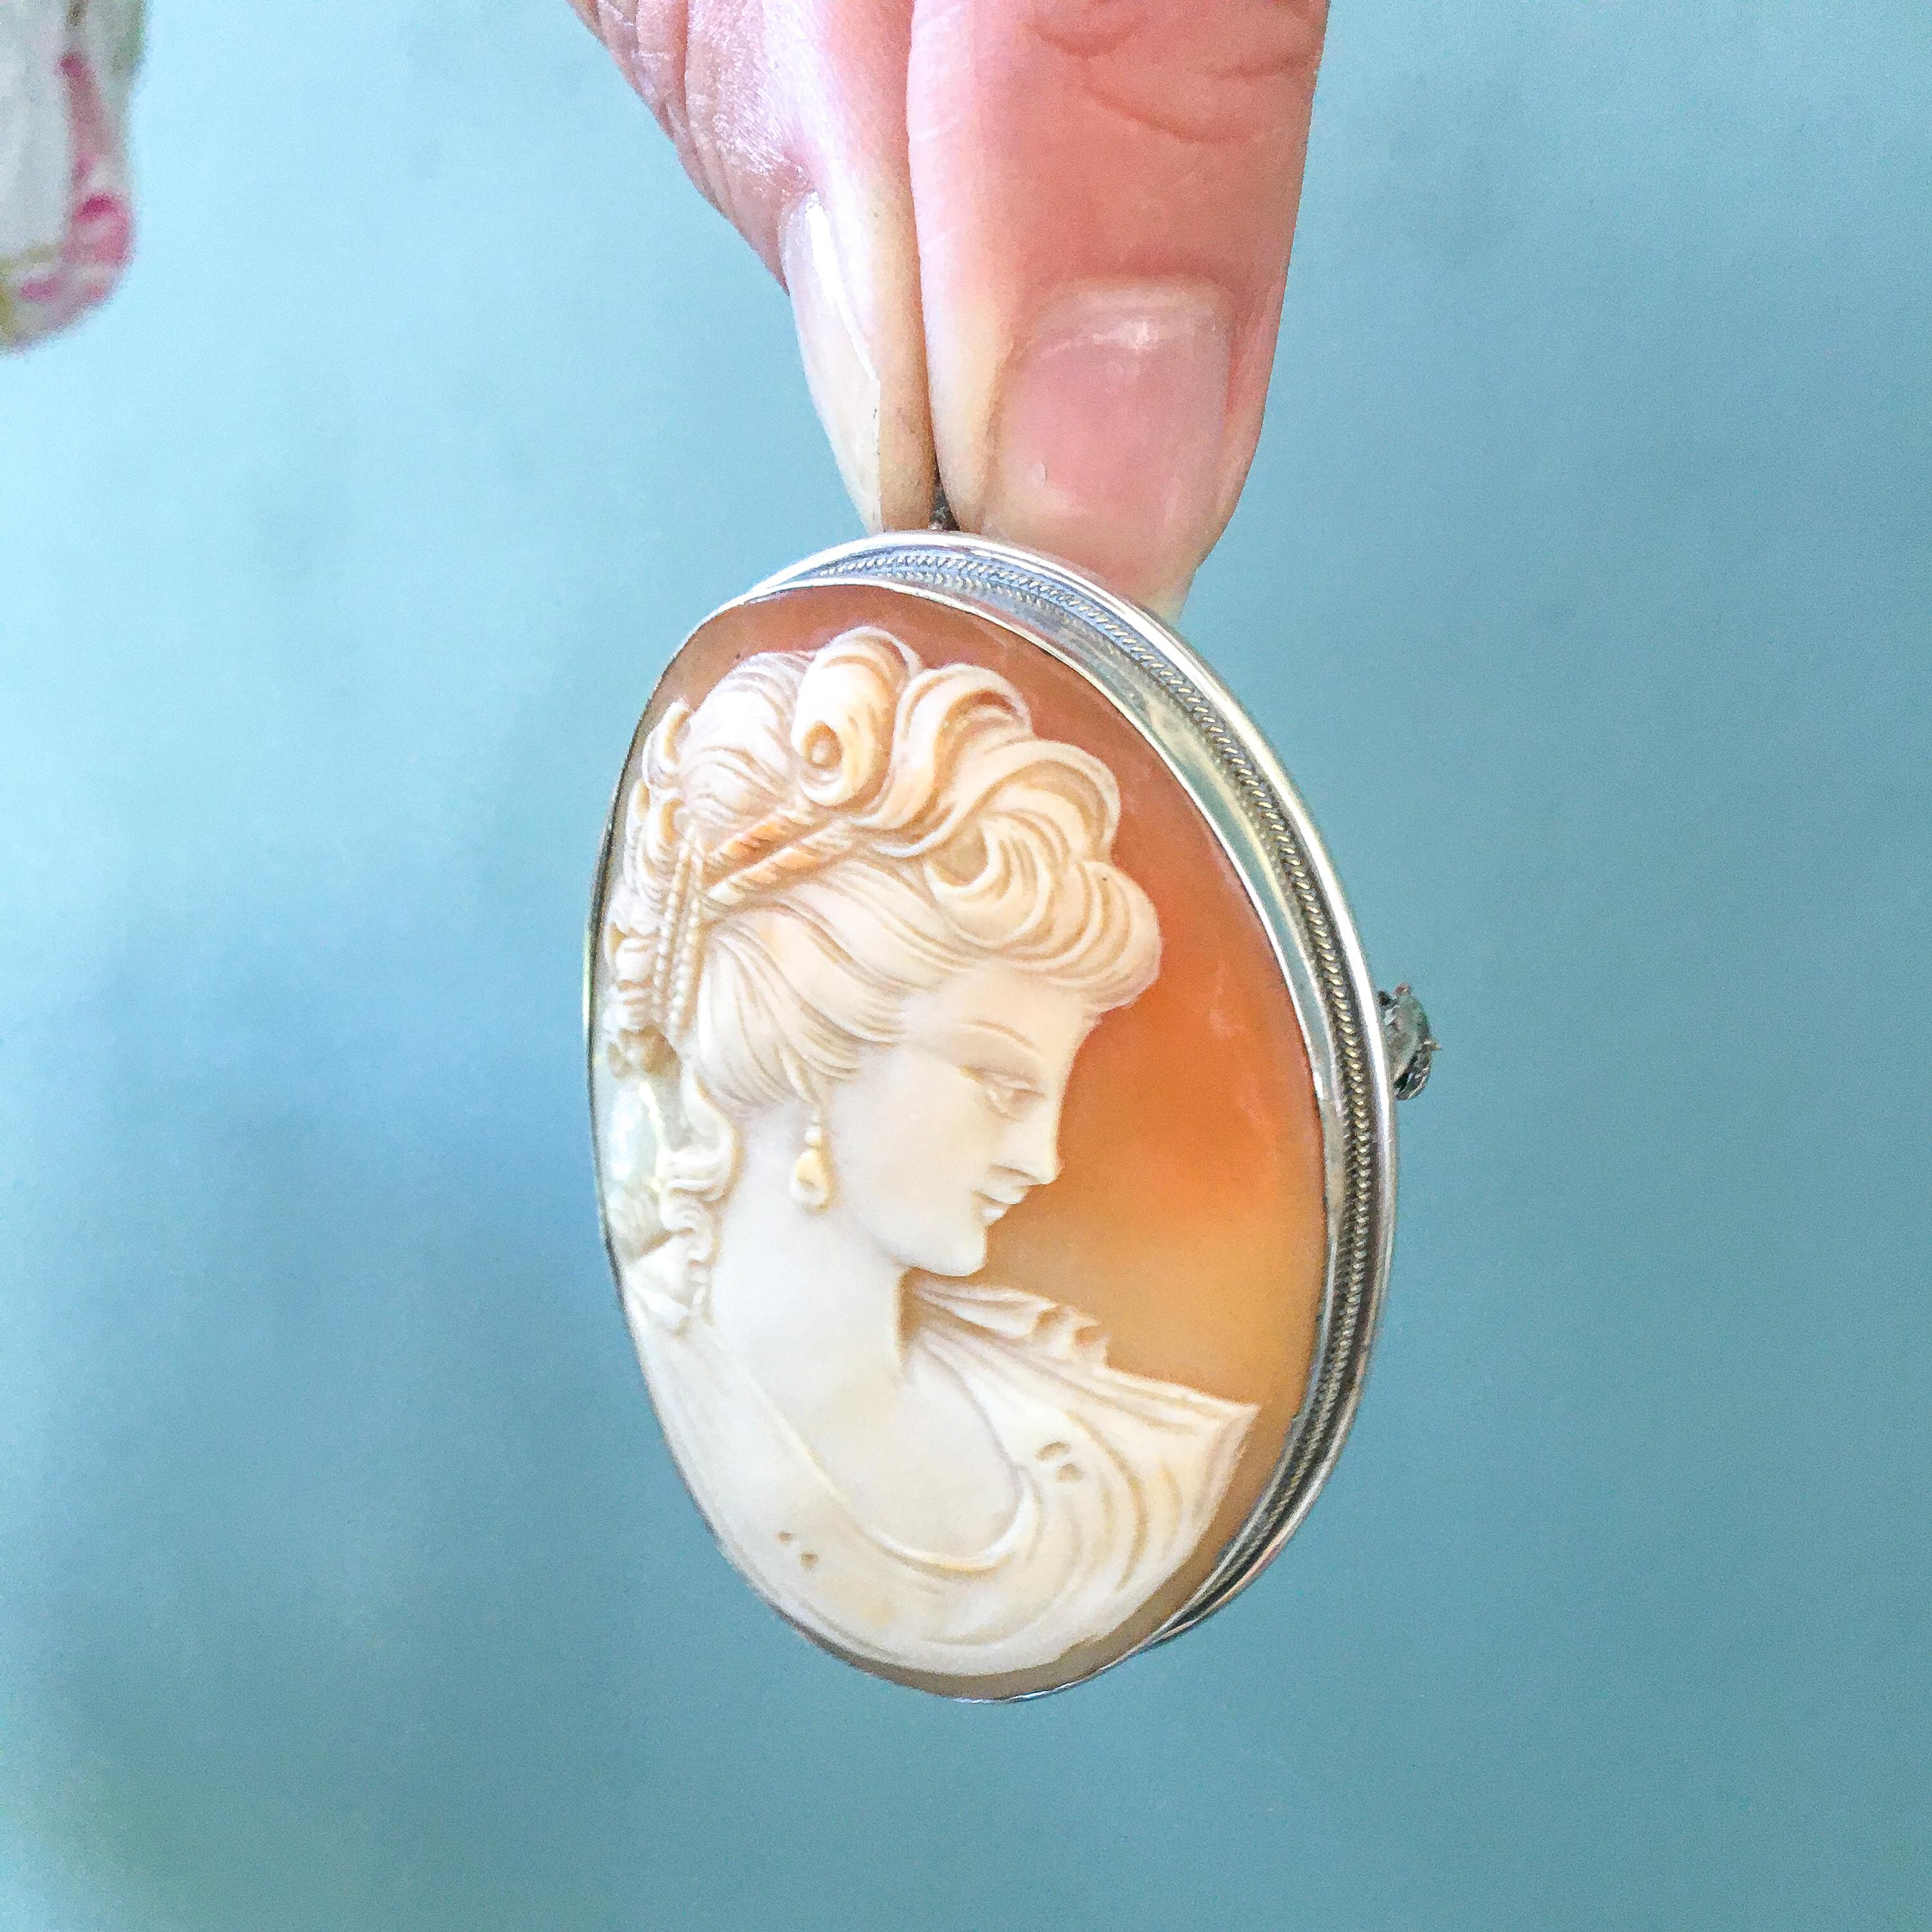 Women's Relief Shell Cameo Silver Pendant Brooch